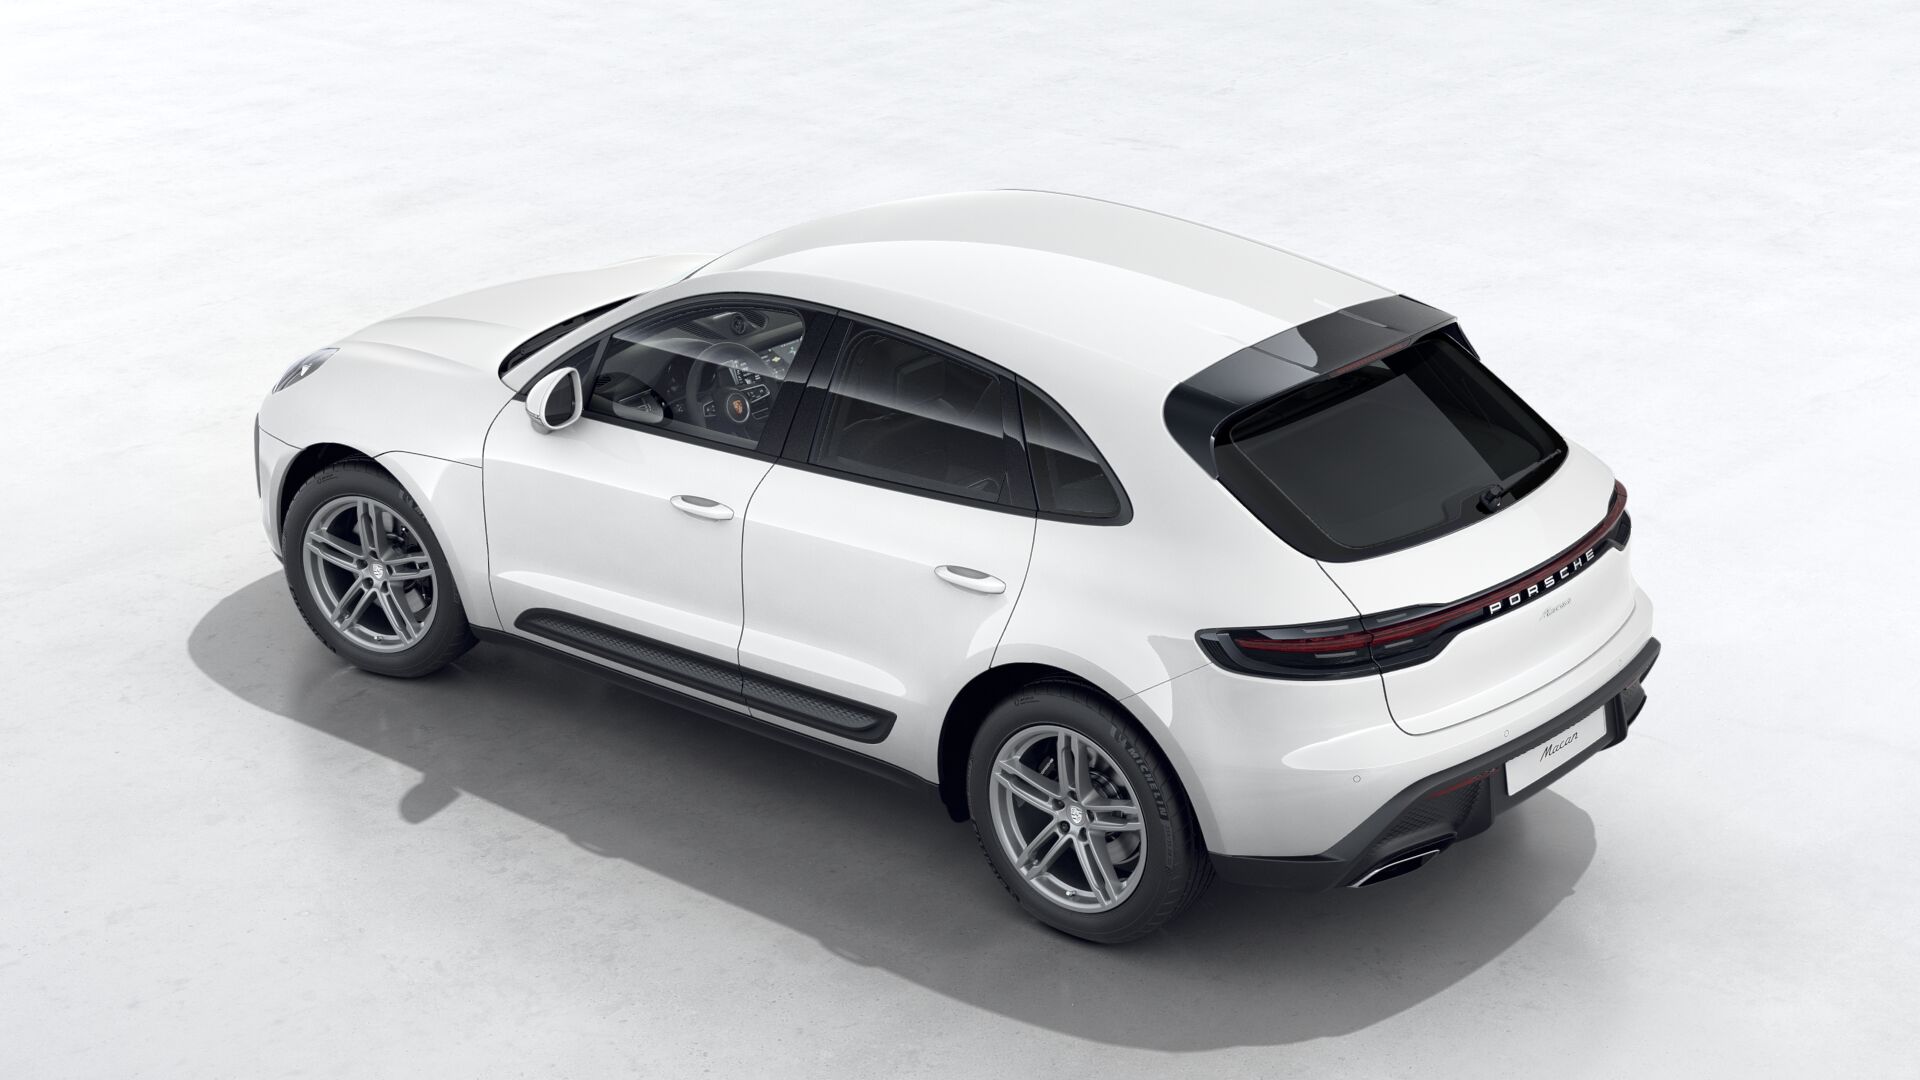 Exterior view of Macan